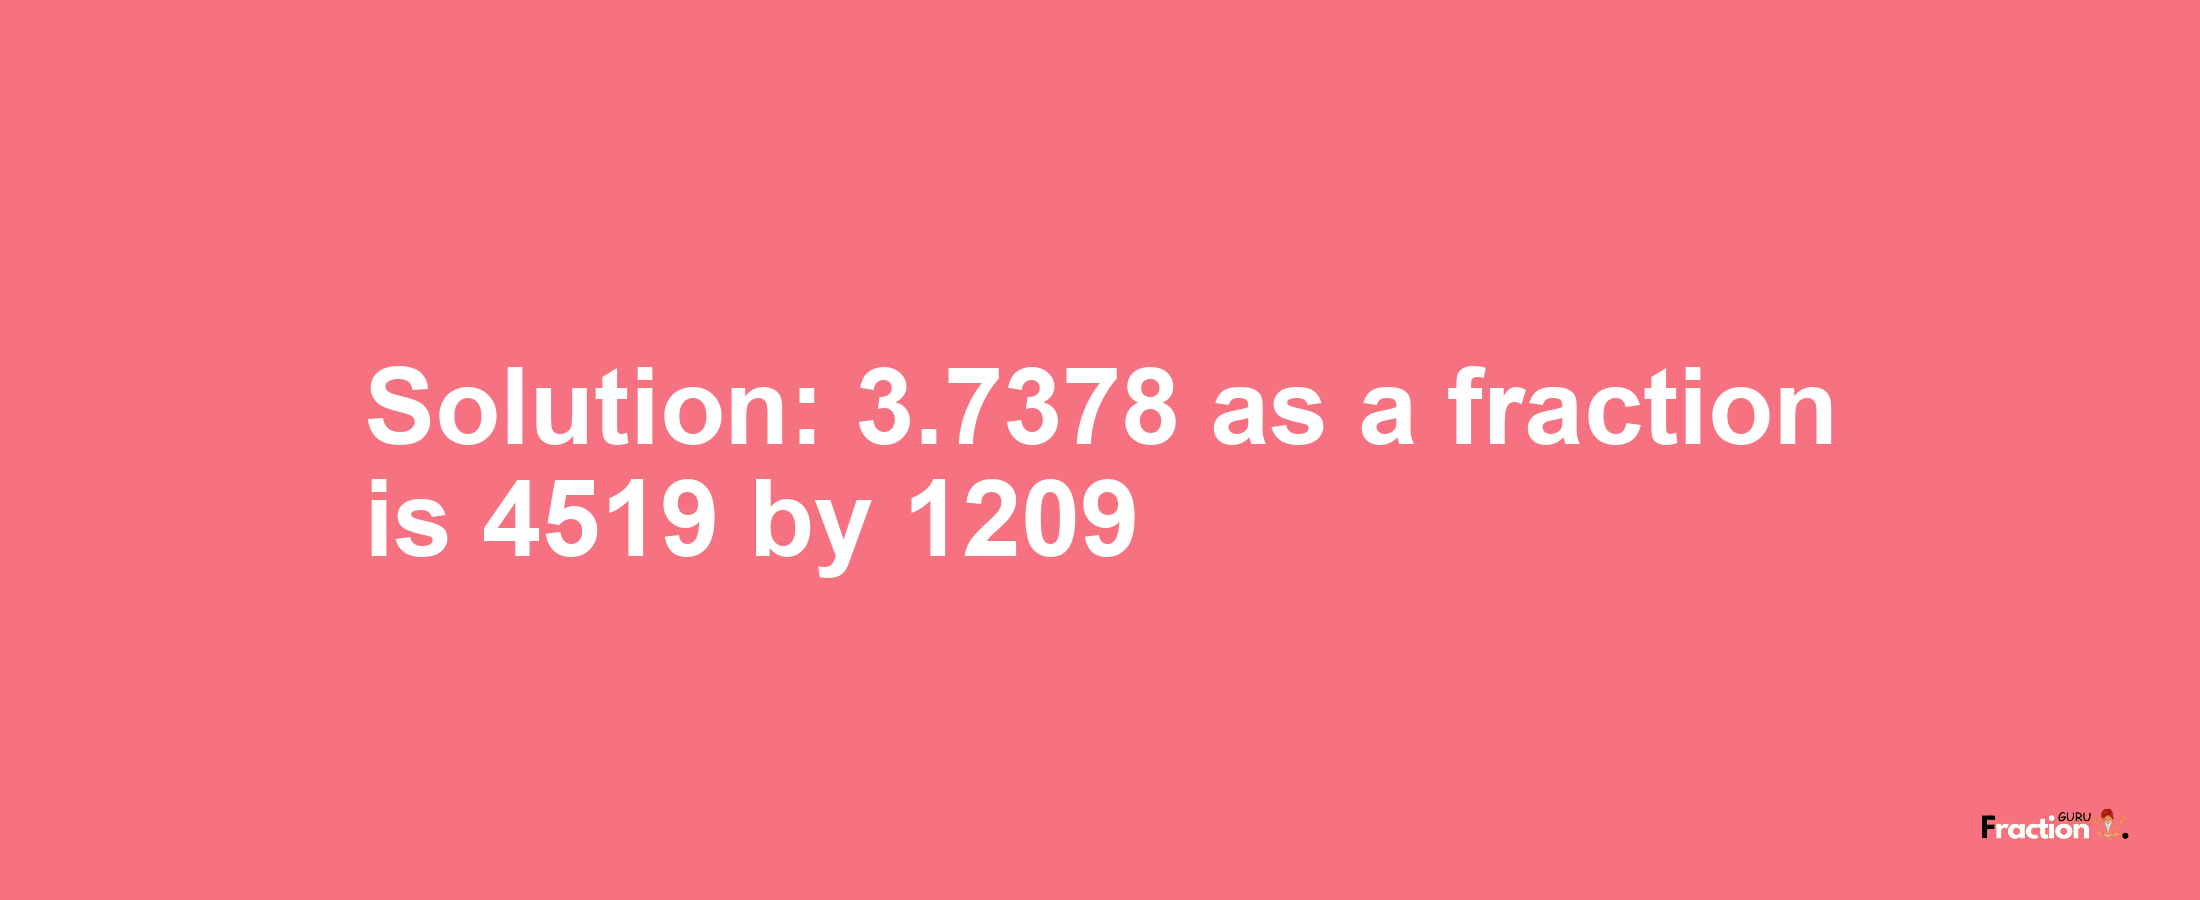 Solution:3.7378 as a fraction is 4519/1209